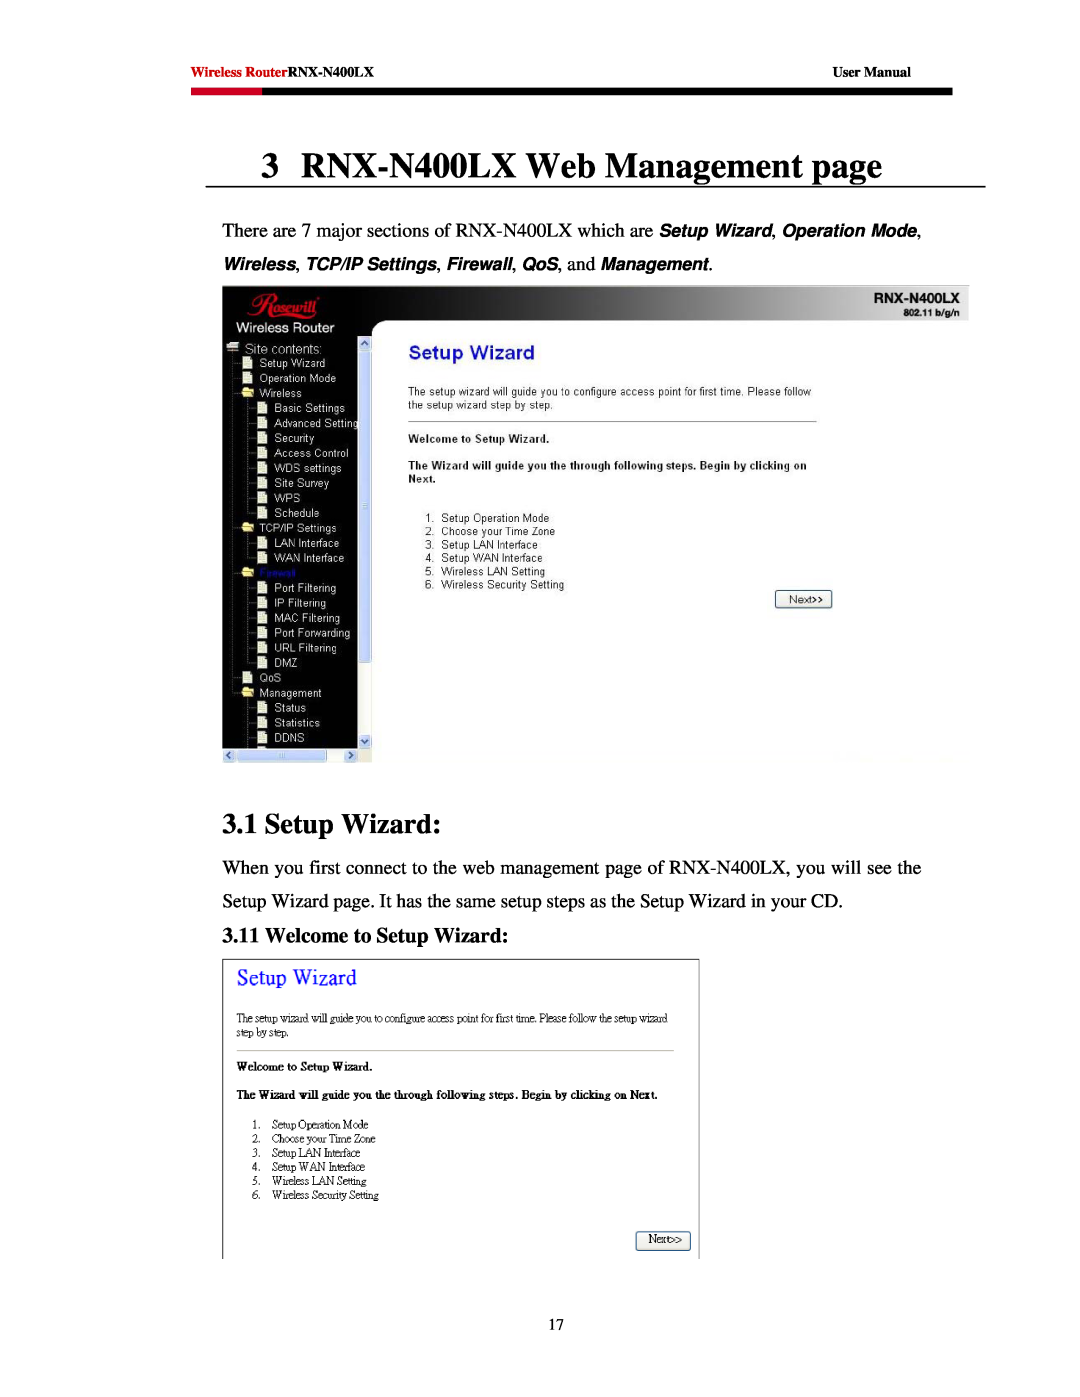 Rosewill user manual RNX-N400LX Web Management page, Welcome to Setup Wizard, Wireless RouterRNX-N400LX, User Manual 